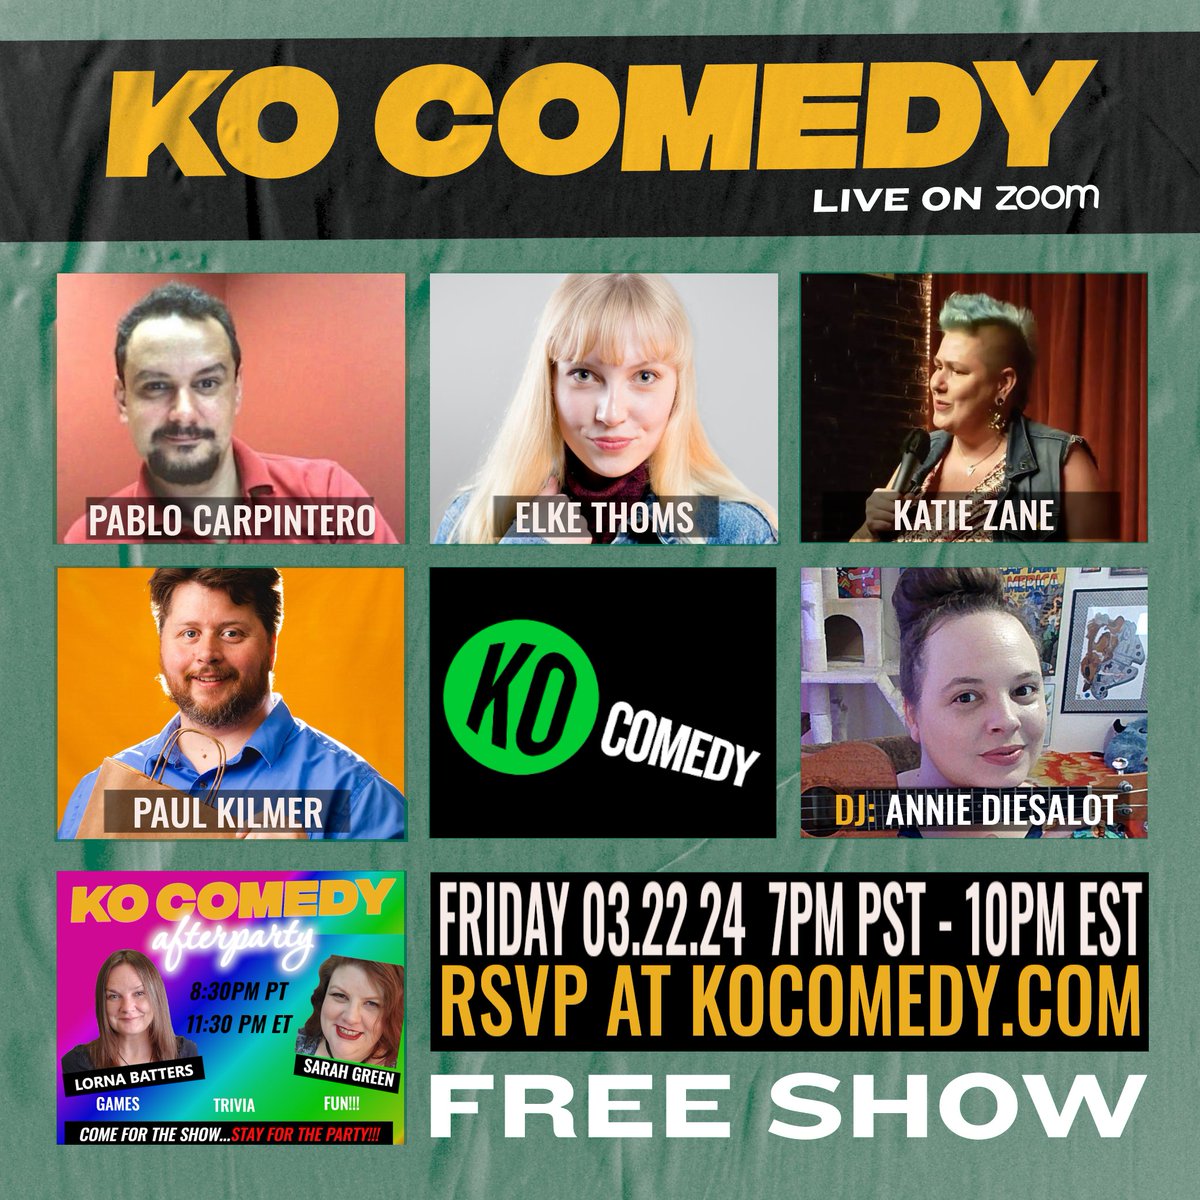 We're live! Come join us. Get your free Zoom link at KOComedy.com or watch on Twitch with @ComedyHubLive #KO #Comedy #LOL